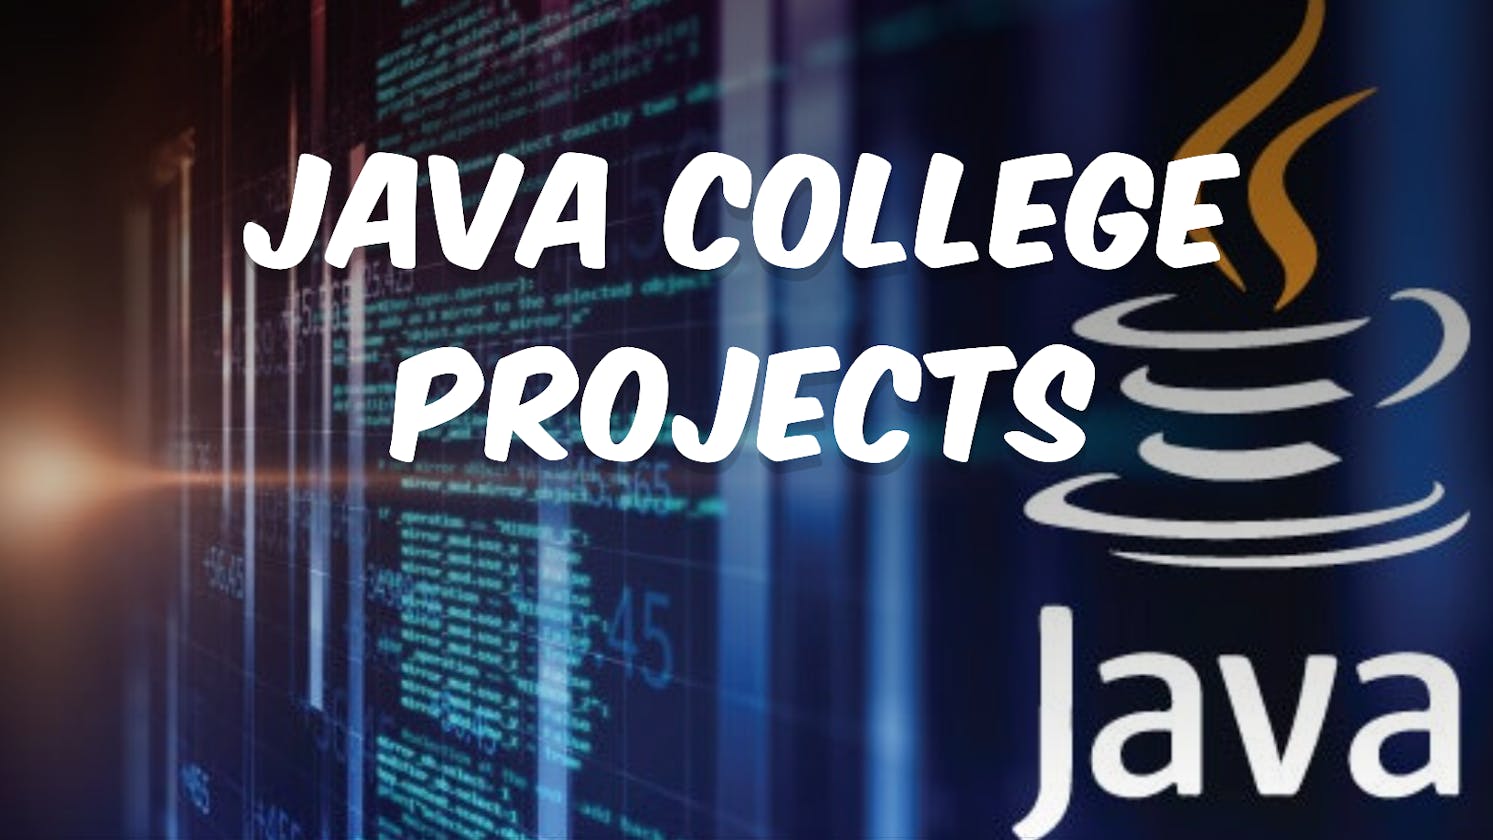 Java College Projects: A Path to Excellence